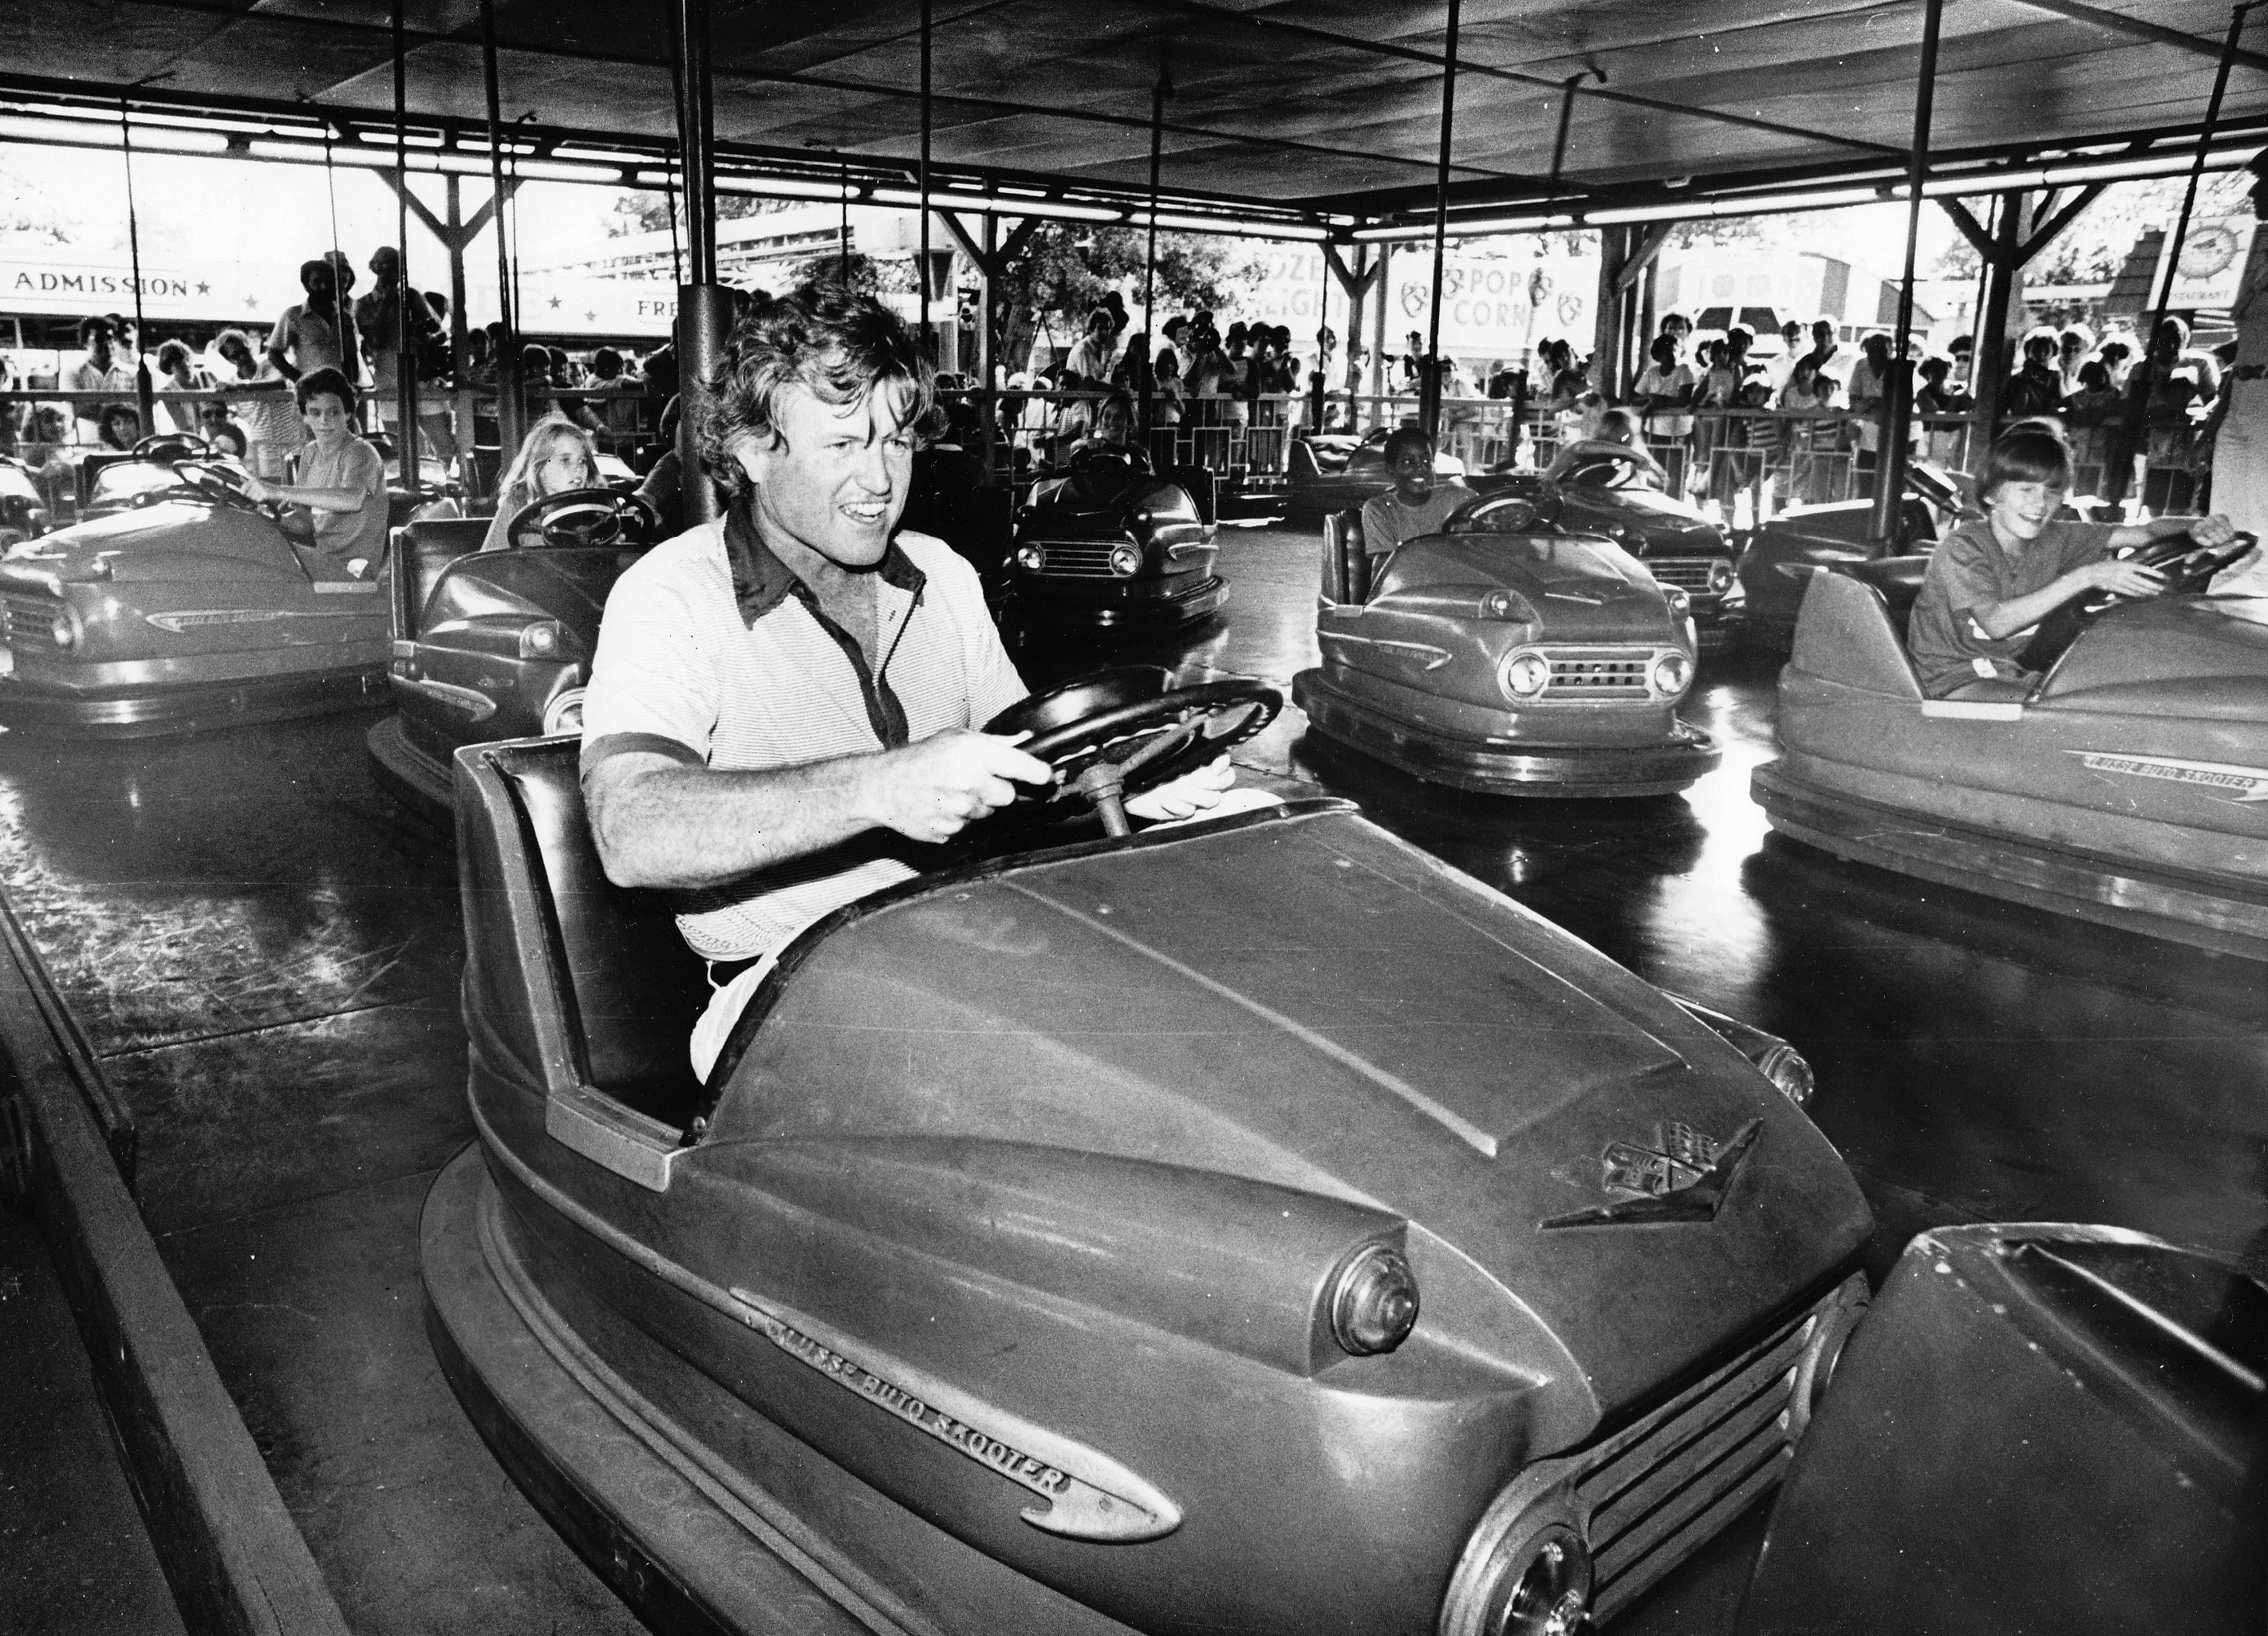 August 7, 1979 - Agawam - Staff photo by Mark M. Murray - Sen. Edward M. Kennedy, D-Mass., rides the bumper cars during a visit with his family to Riverside Park.